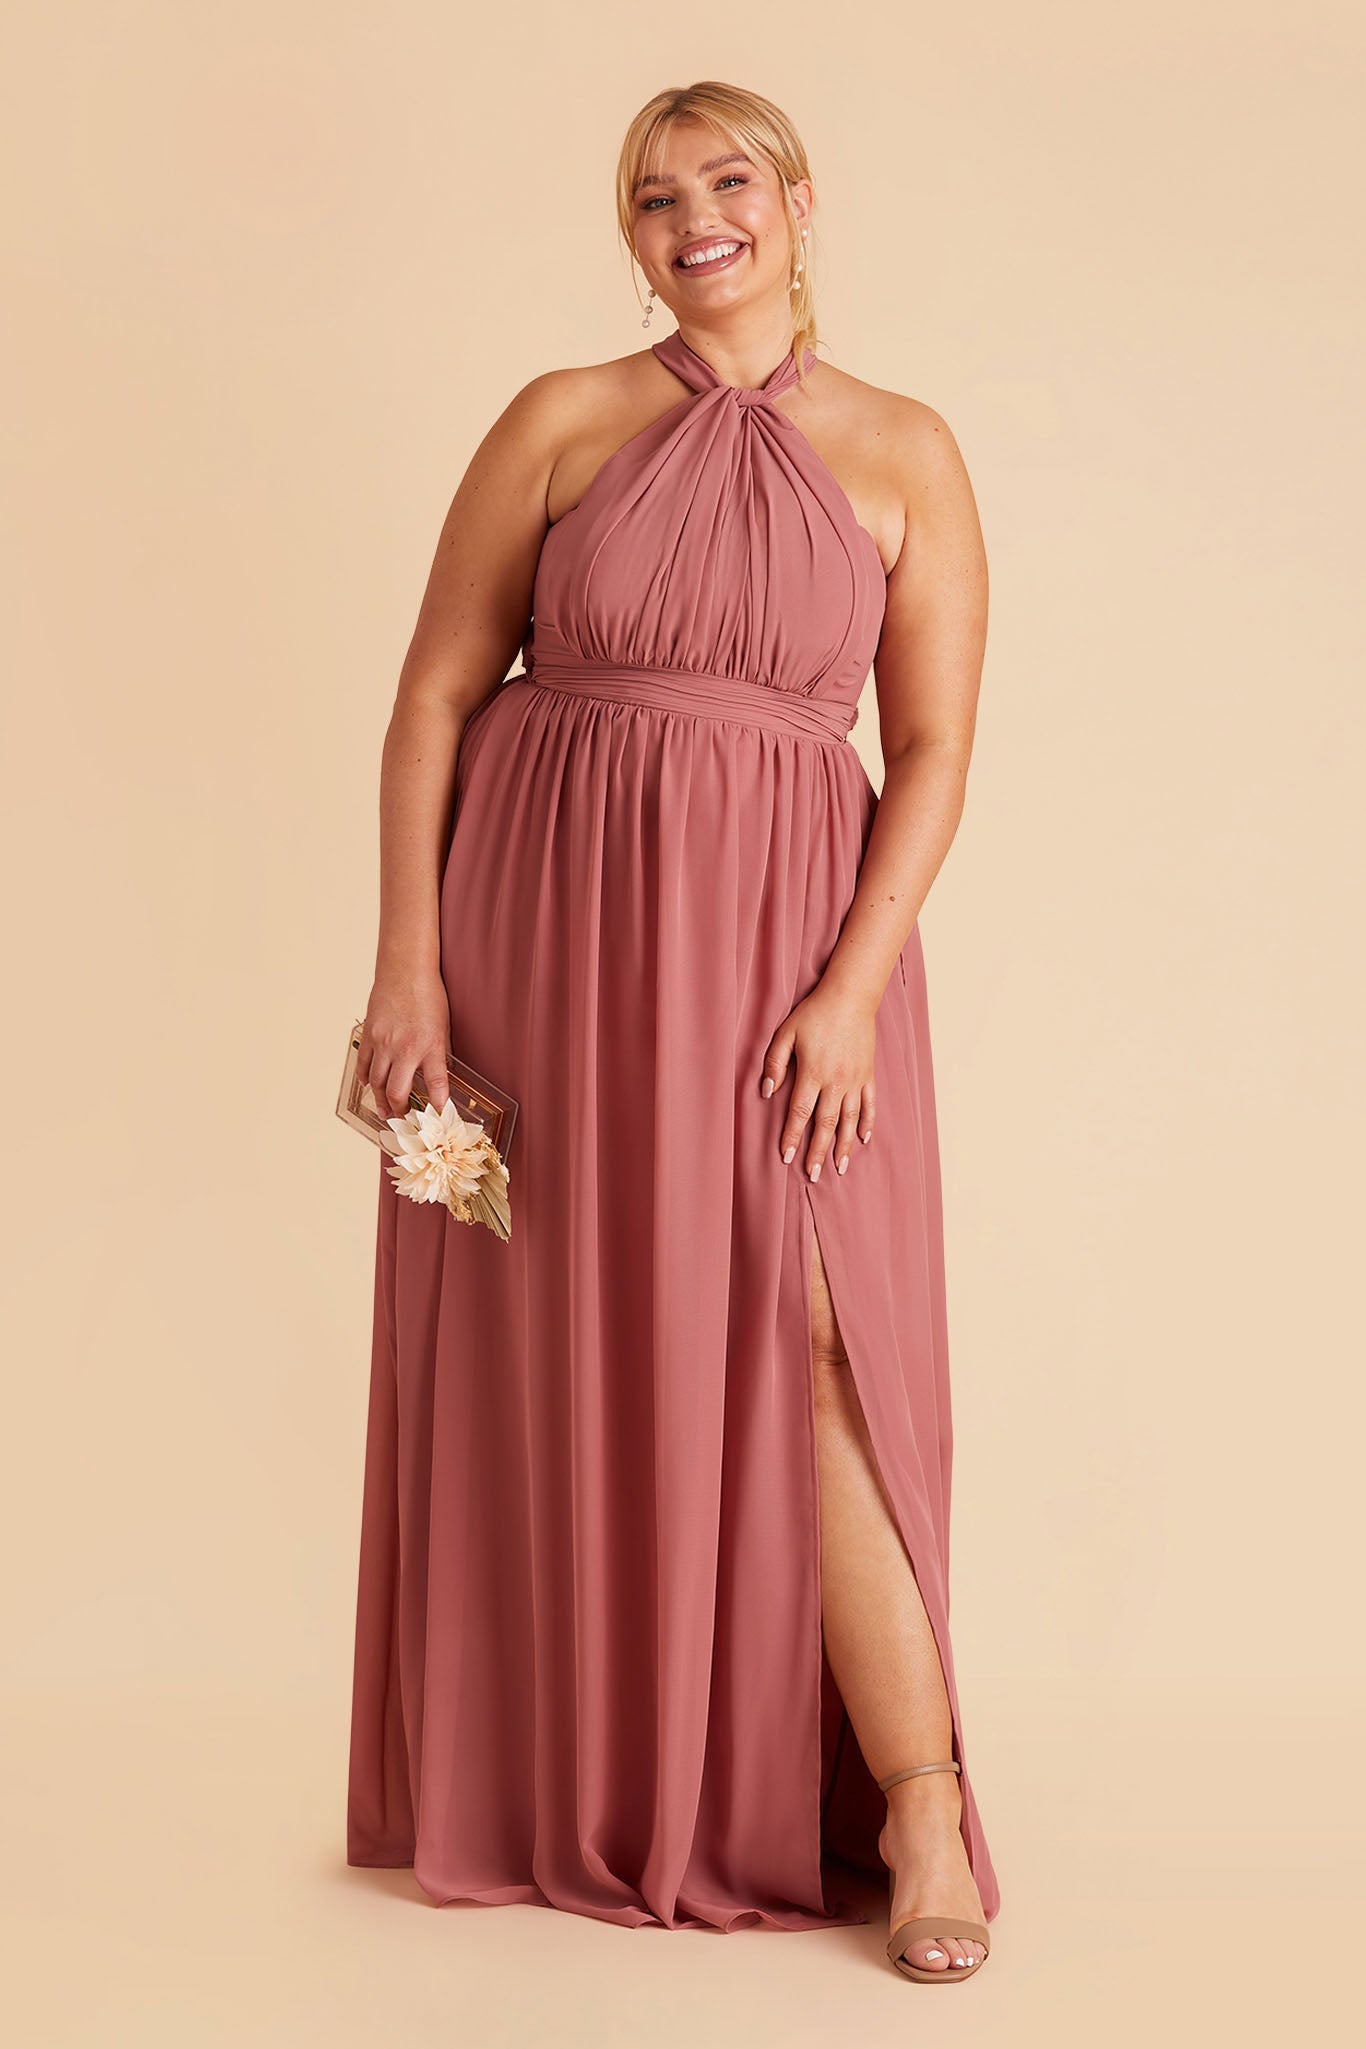 Grace Convertible Chiffon Bridesmaid Dress with Slit in Mulberry